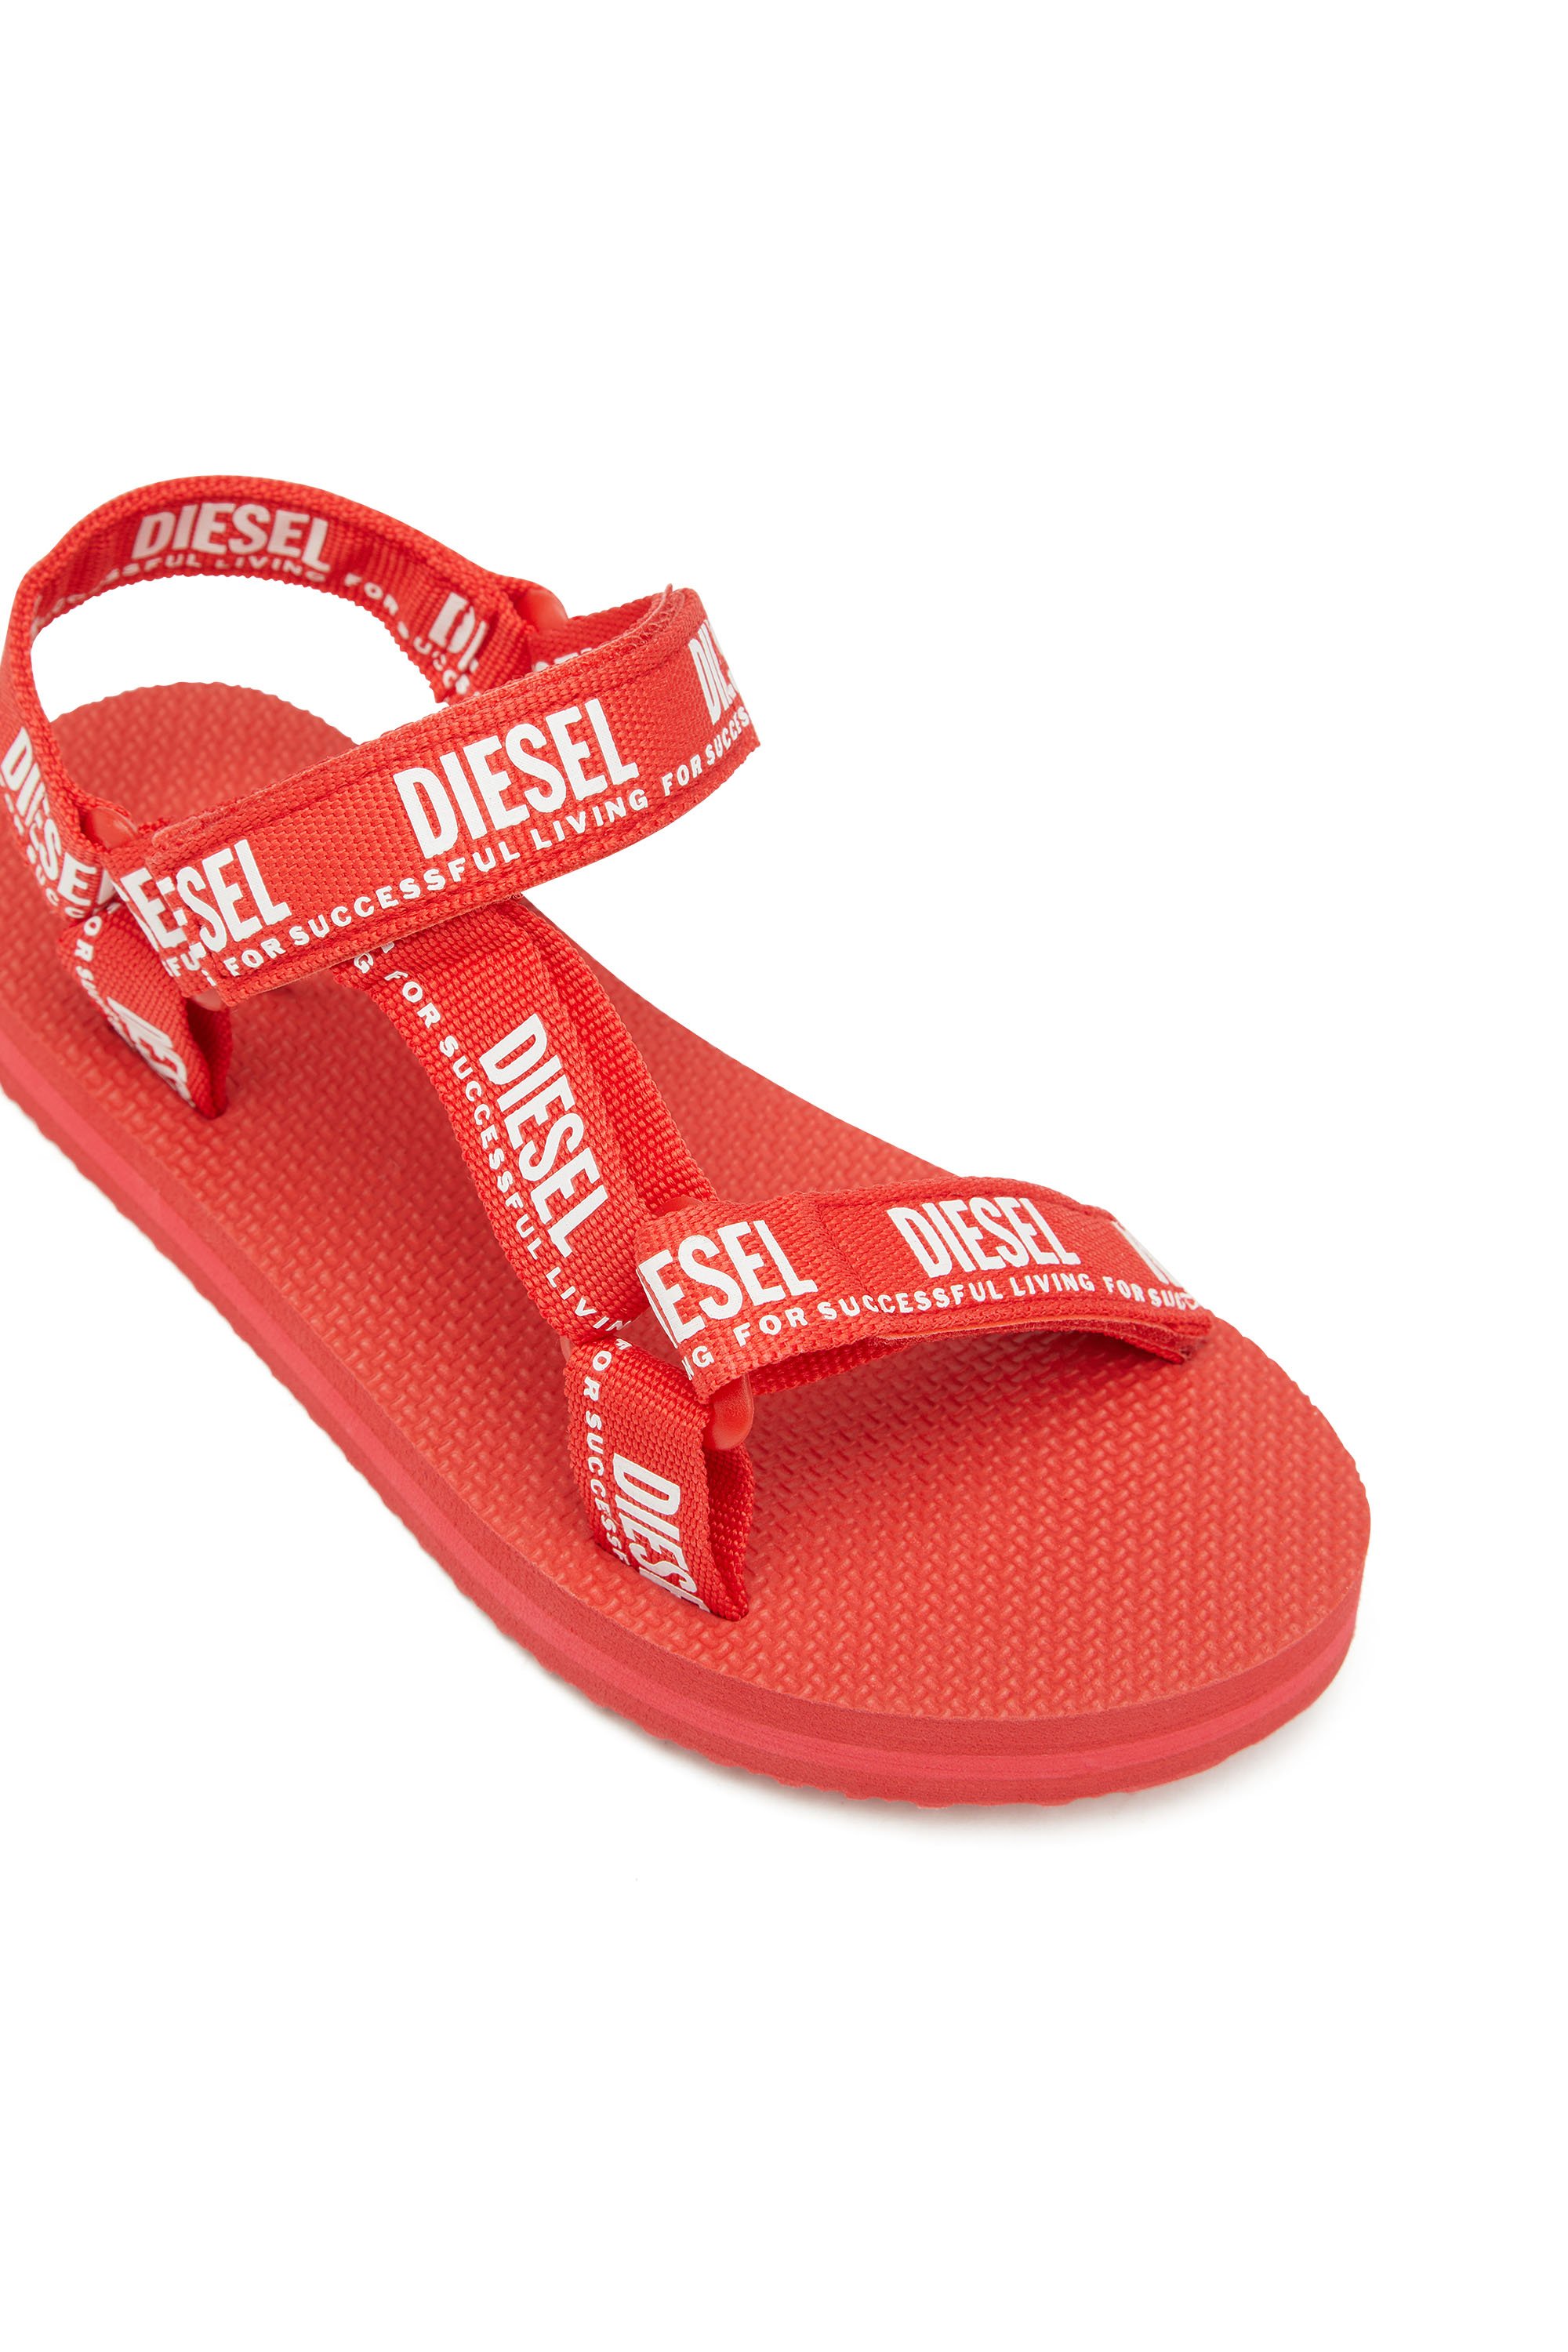 Diesel - S-ANDAL T, Red - Image 4